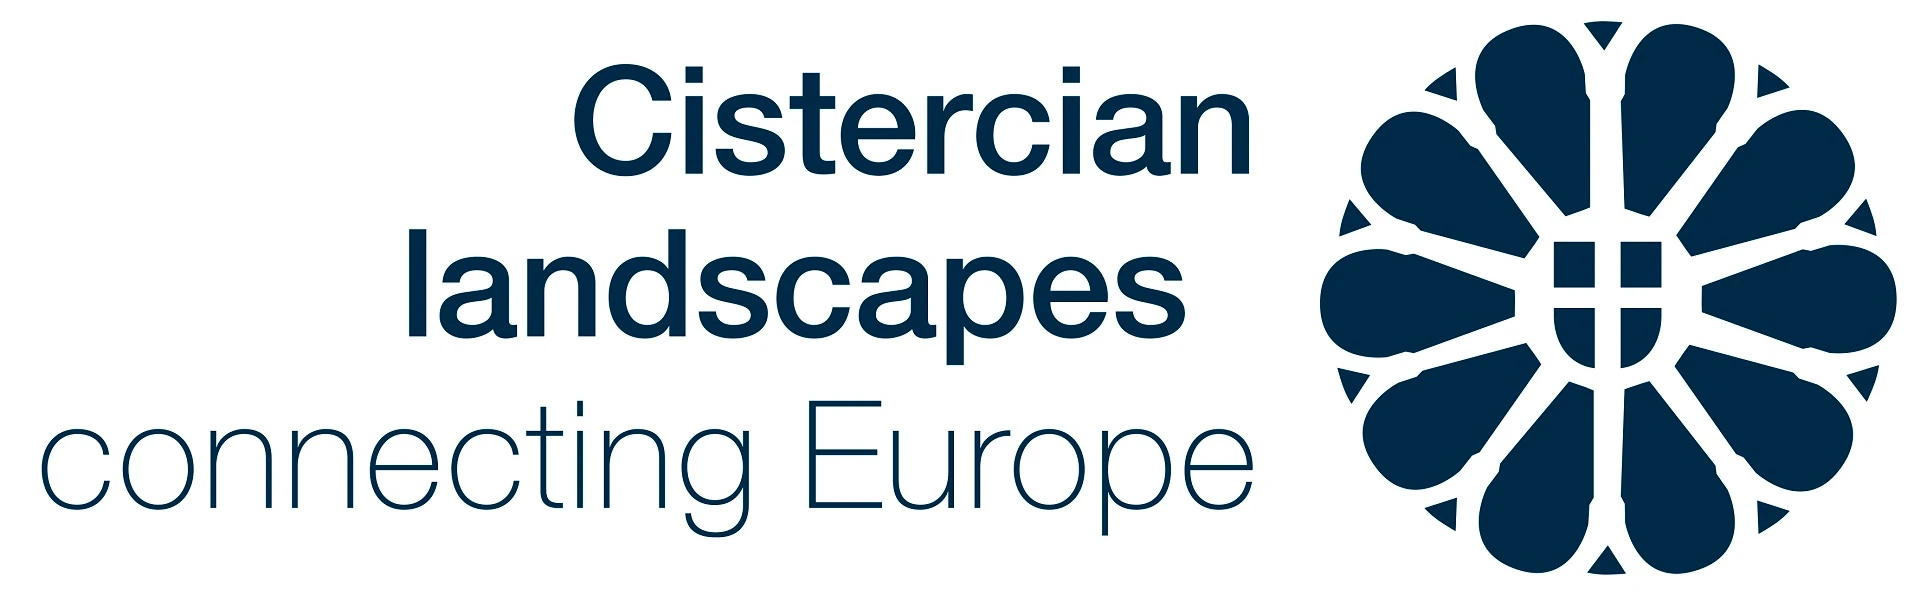 Cisterscapes-cistercian landscapes connecting Europe